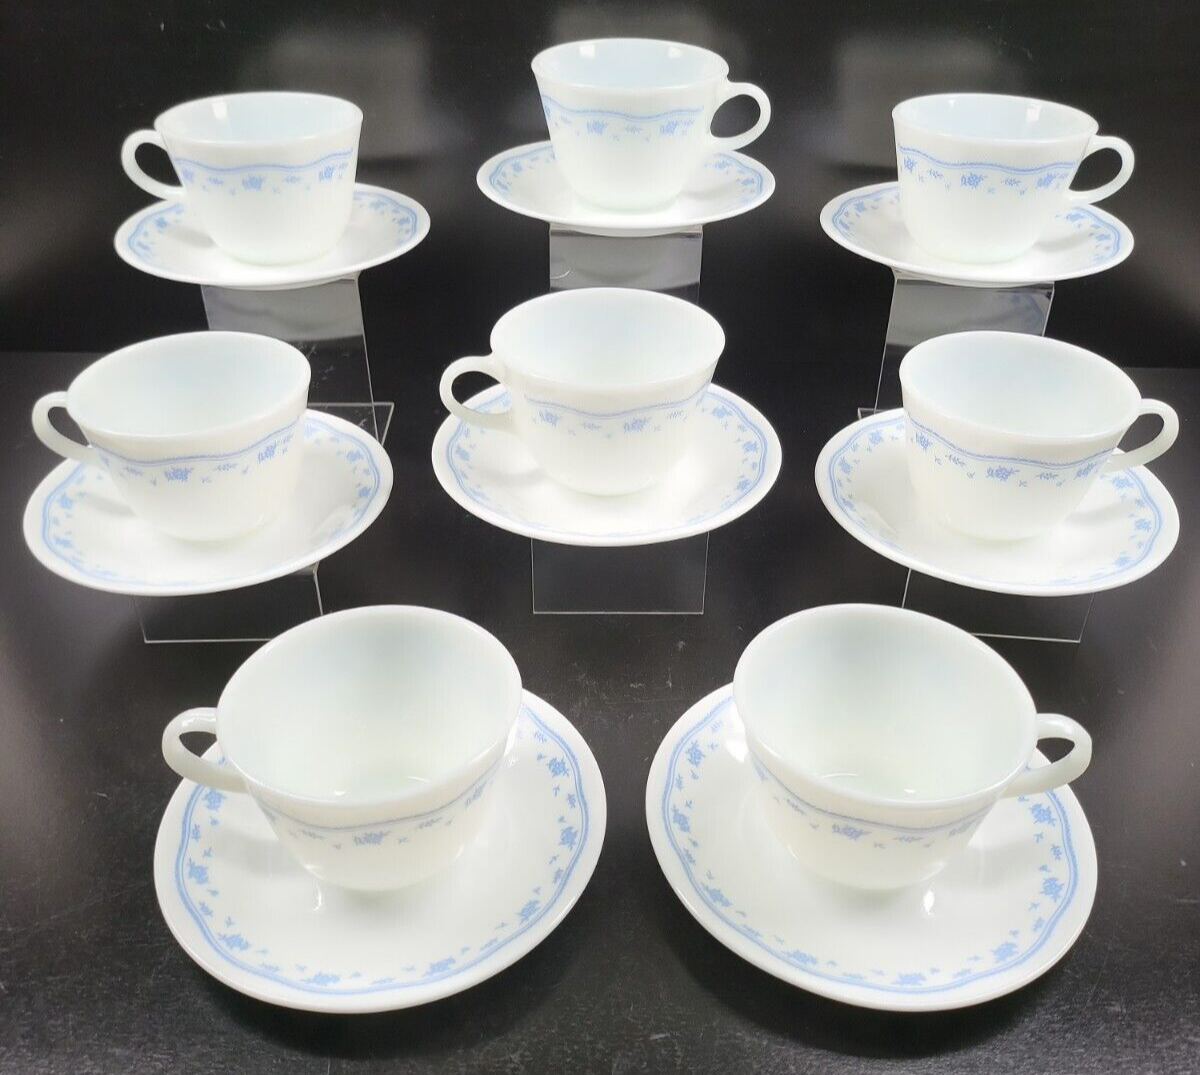 Primary image for 8 Corelle Morning Blue Pyrex Cups Saucers Set Corning Floral Milk Glass Dish Lot